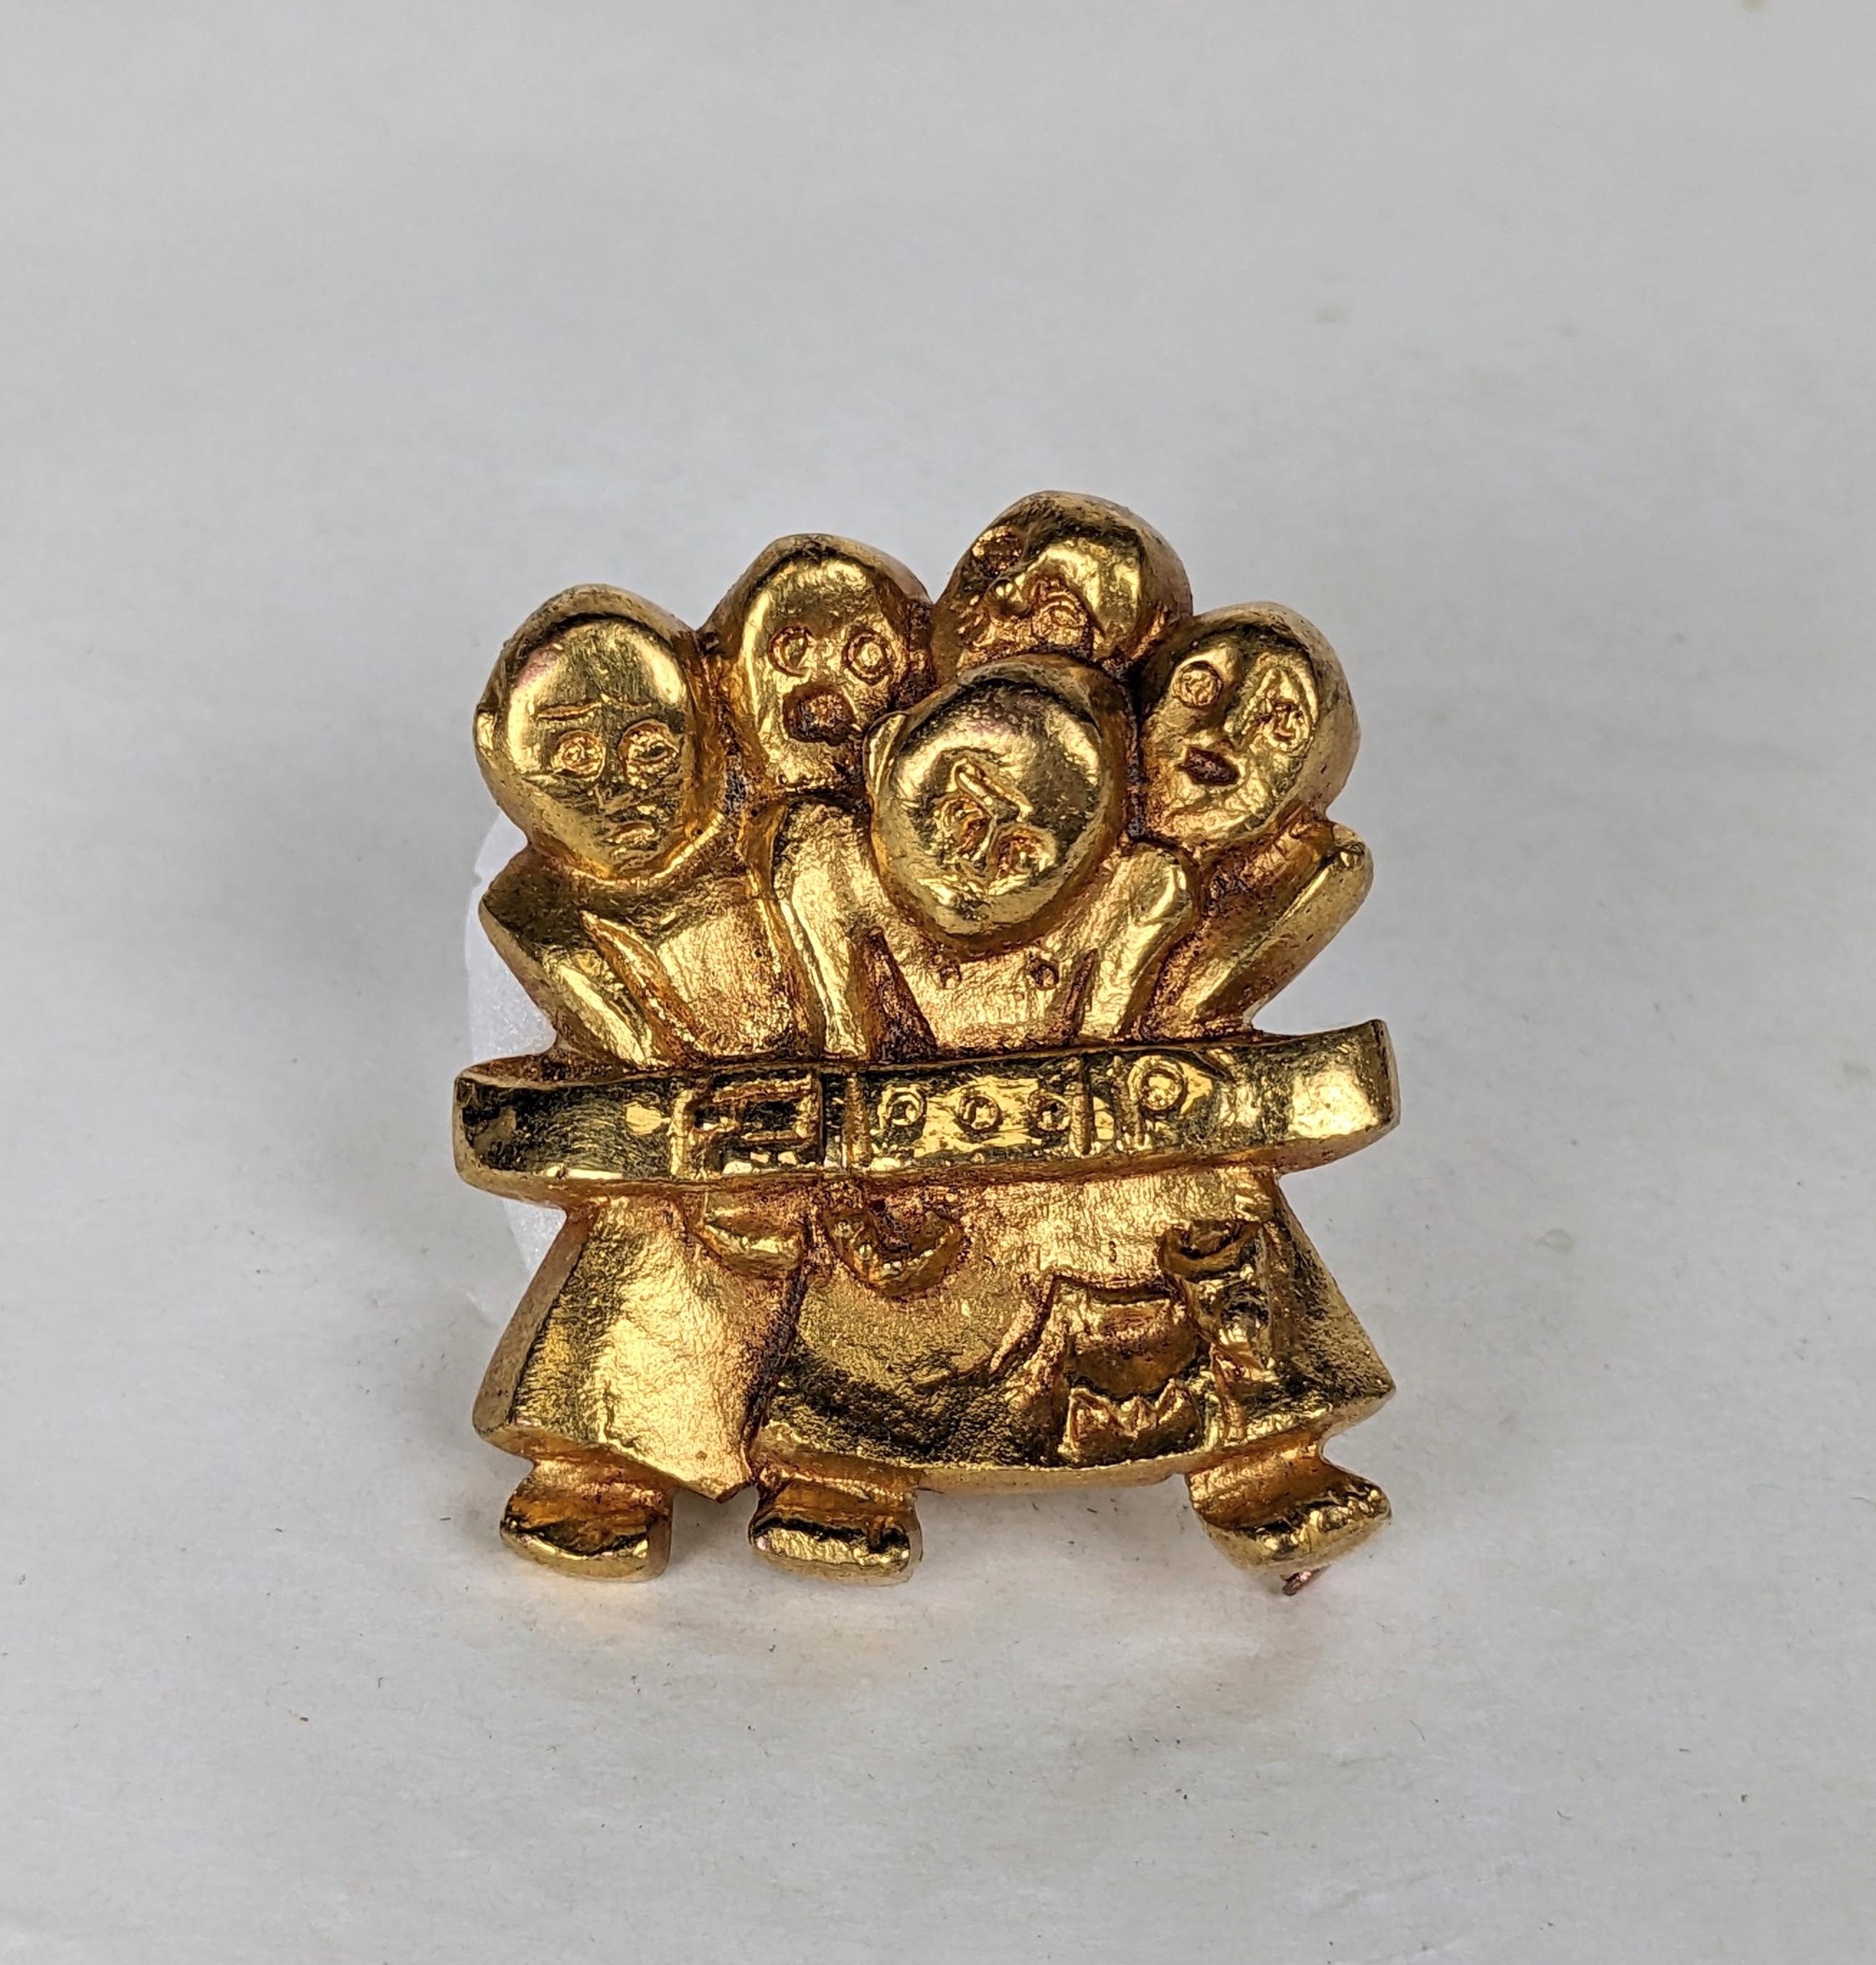 Gilt brooch by Line Vautrin (1913-1997), circa 1945-46. The design is known as                                                           
                                                                                                         
     